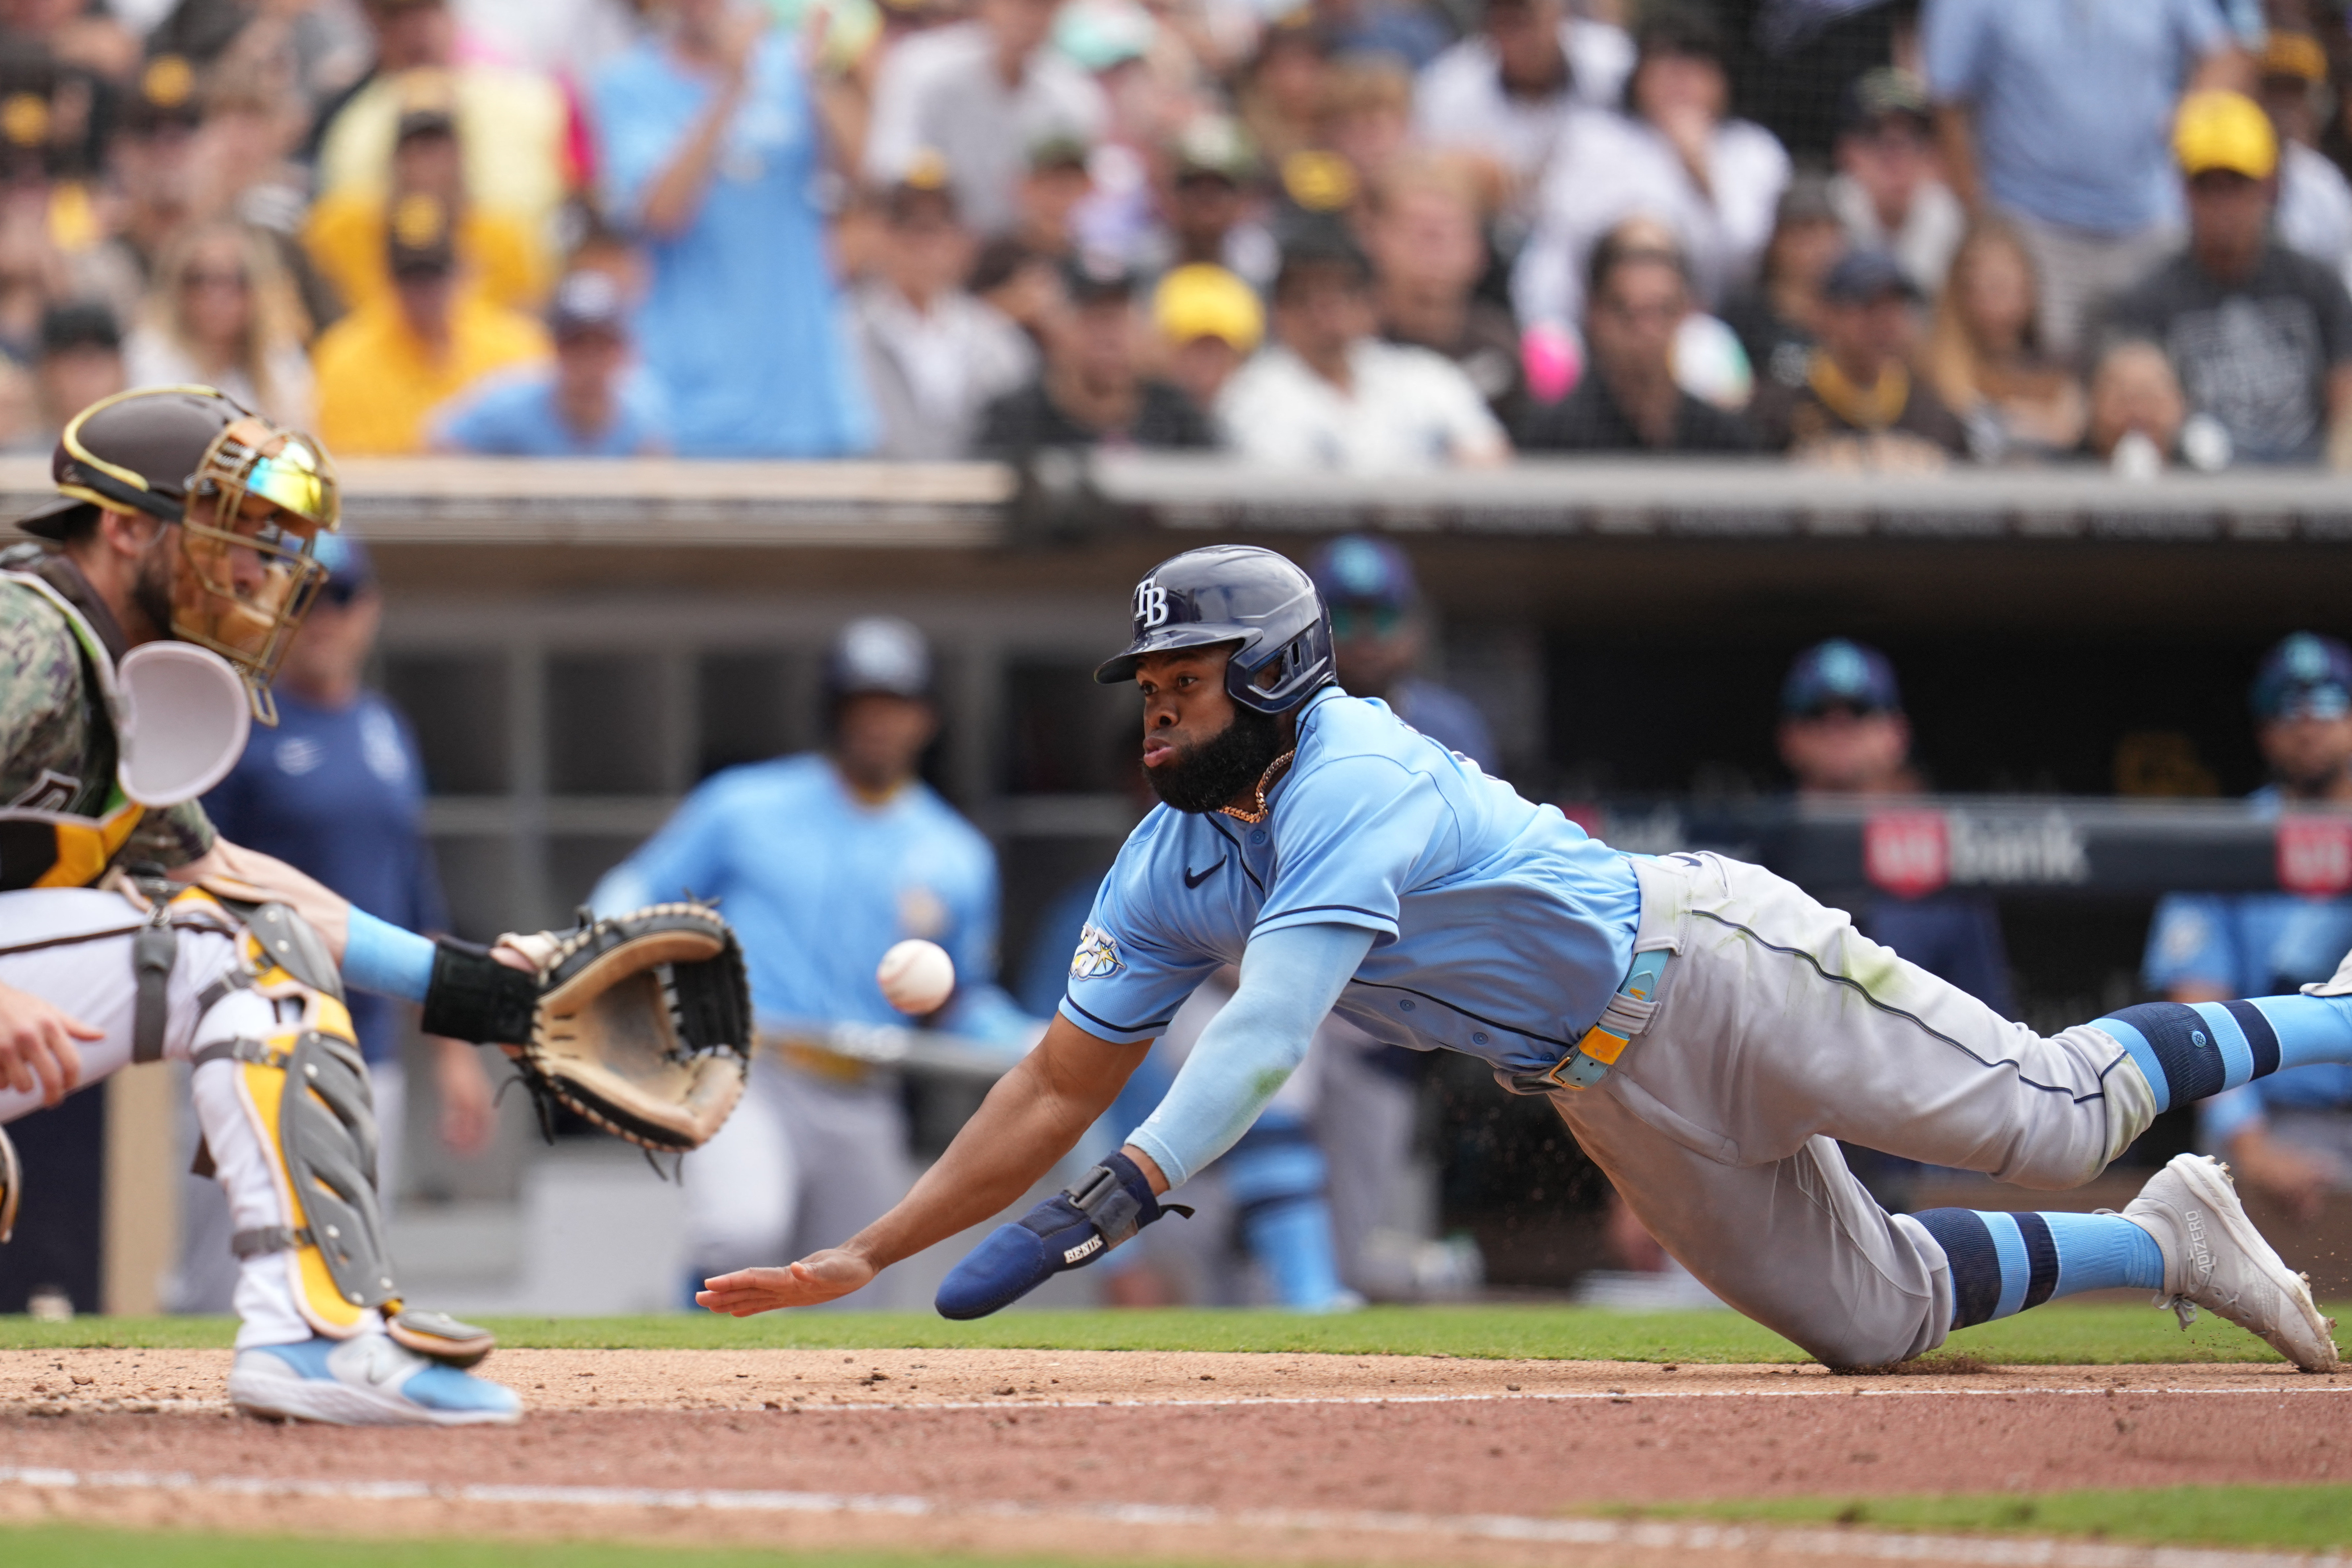 Padres knock off mistake-prone Rays